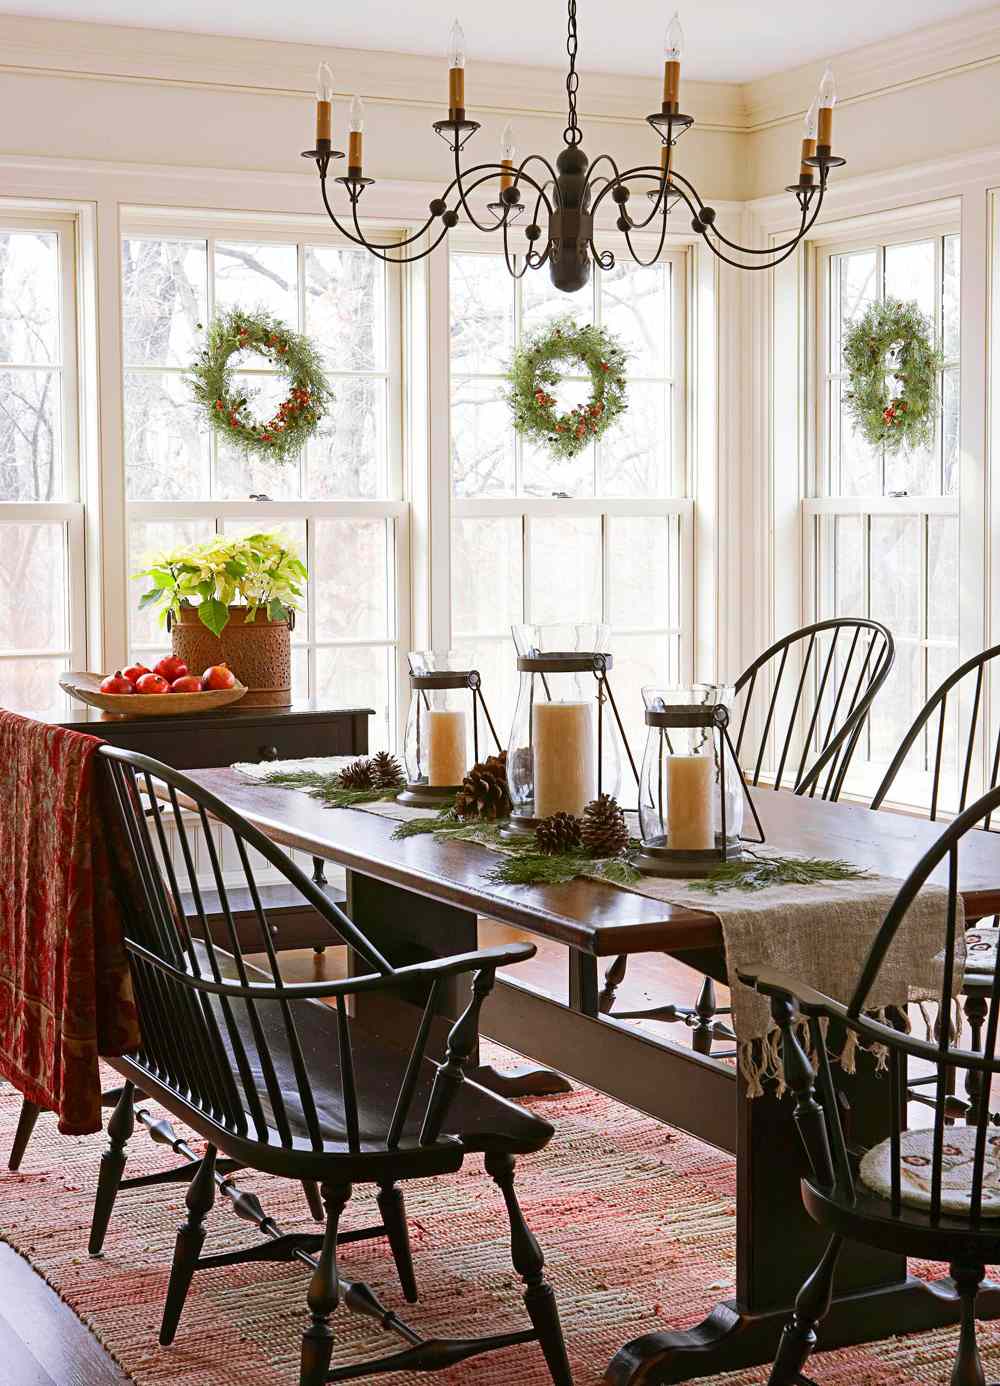 Breakfast room with burlap table runner and three candles on table with pinecones